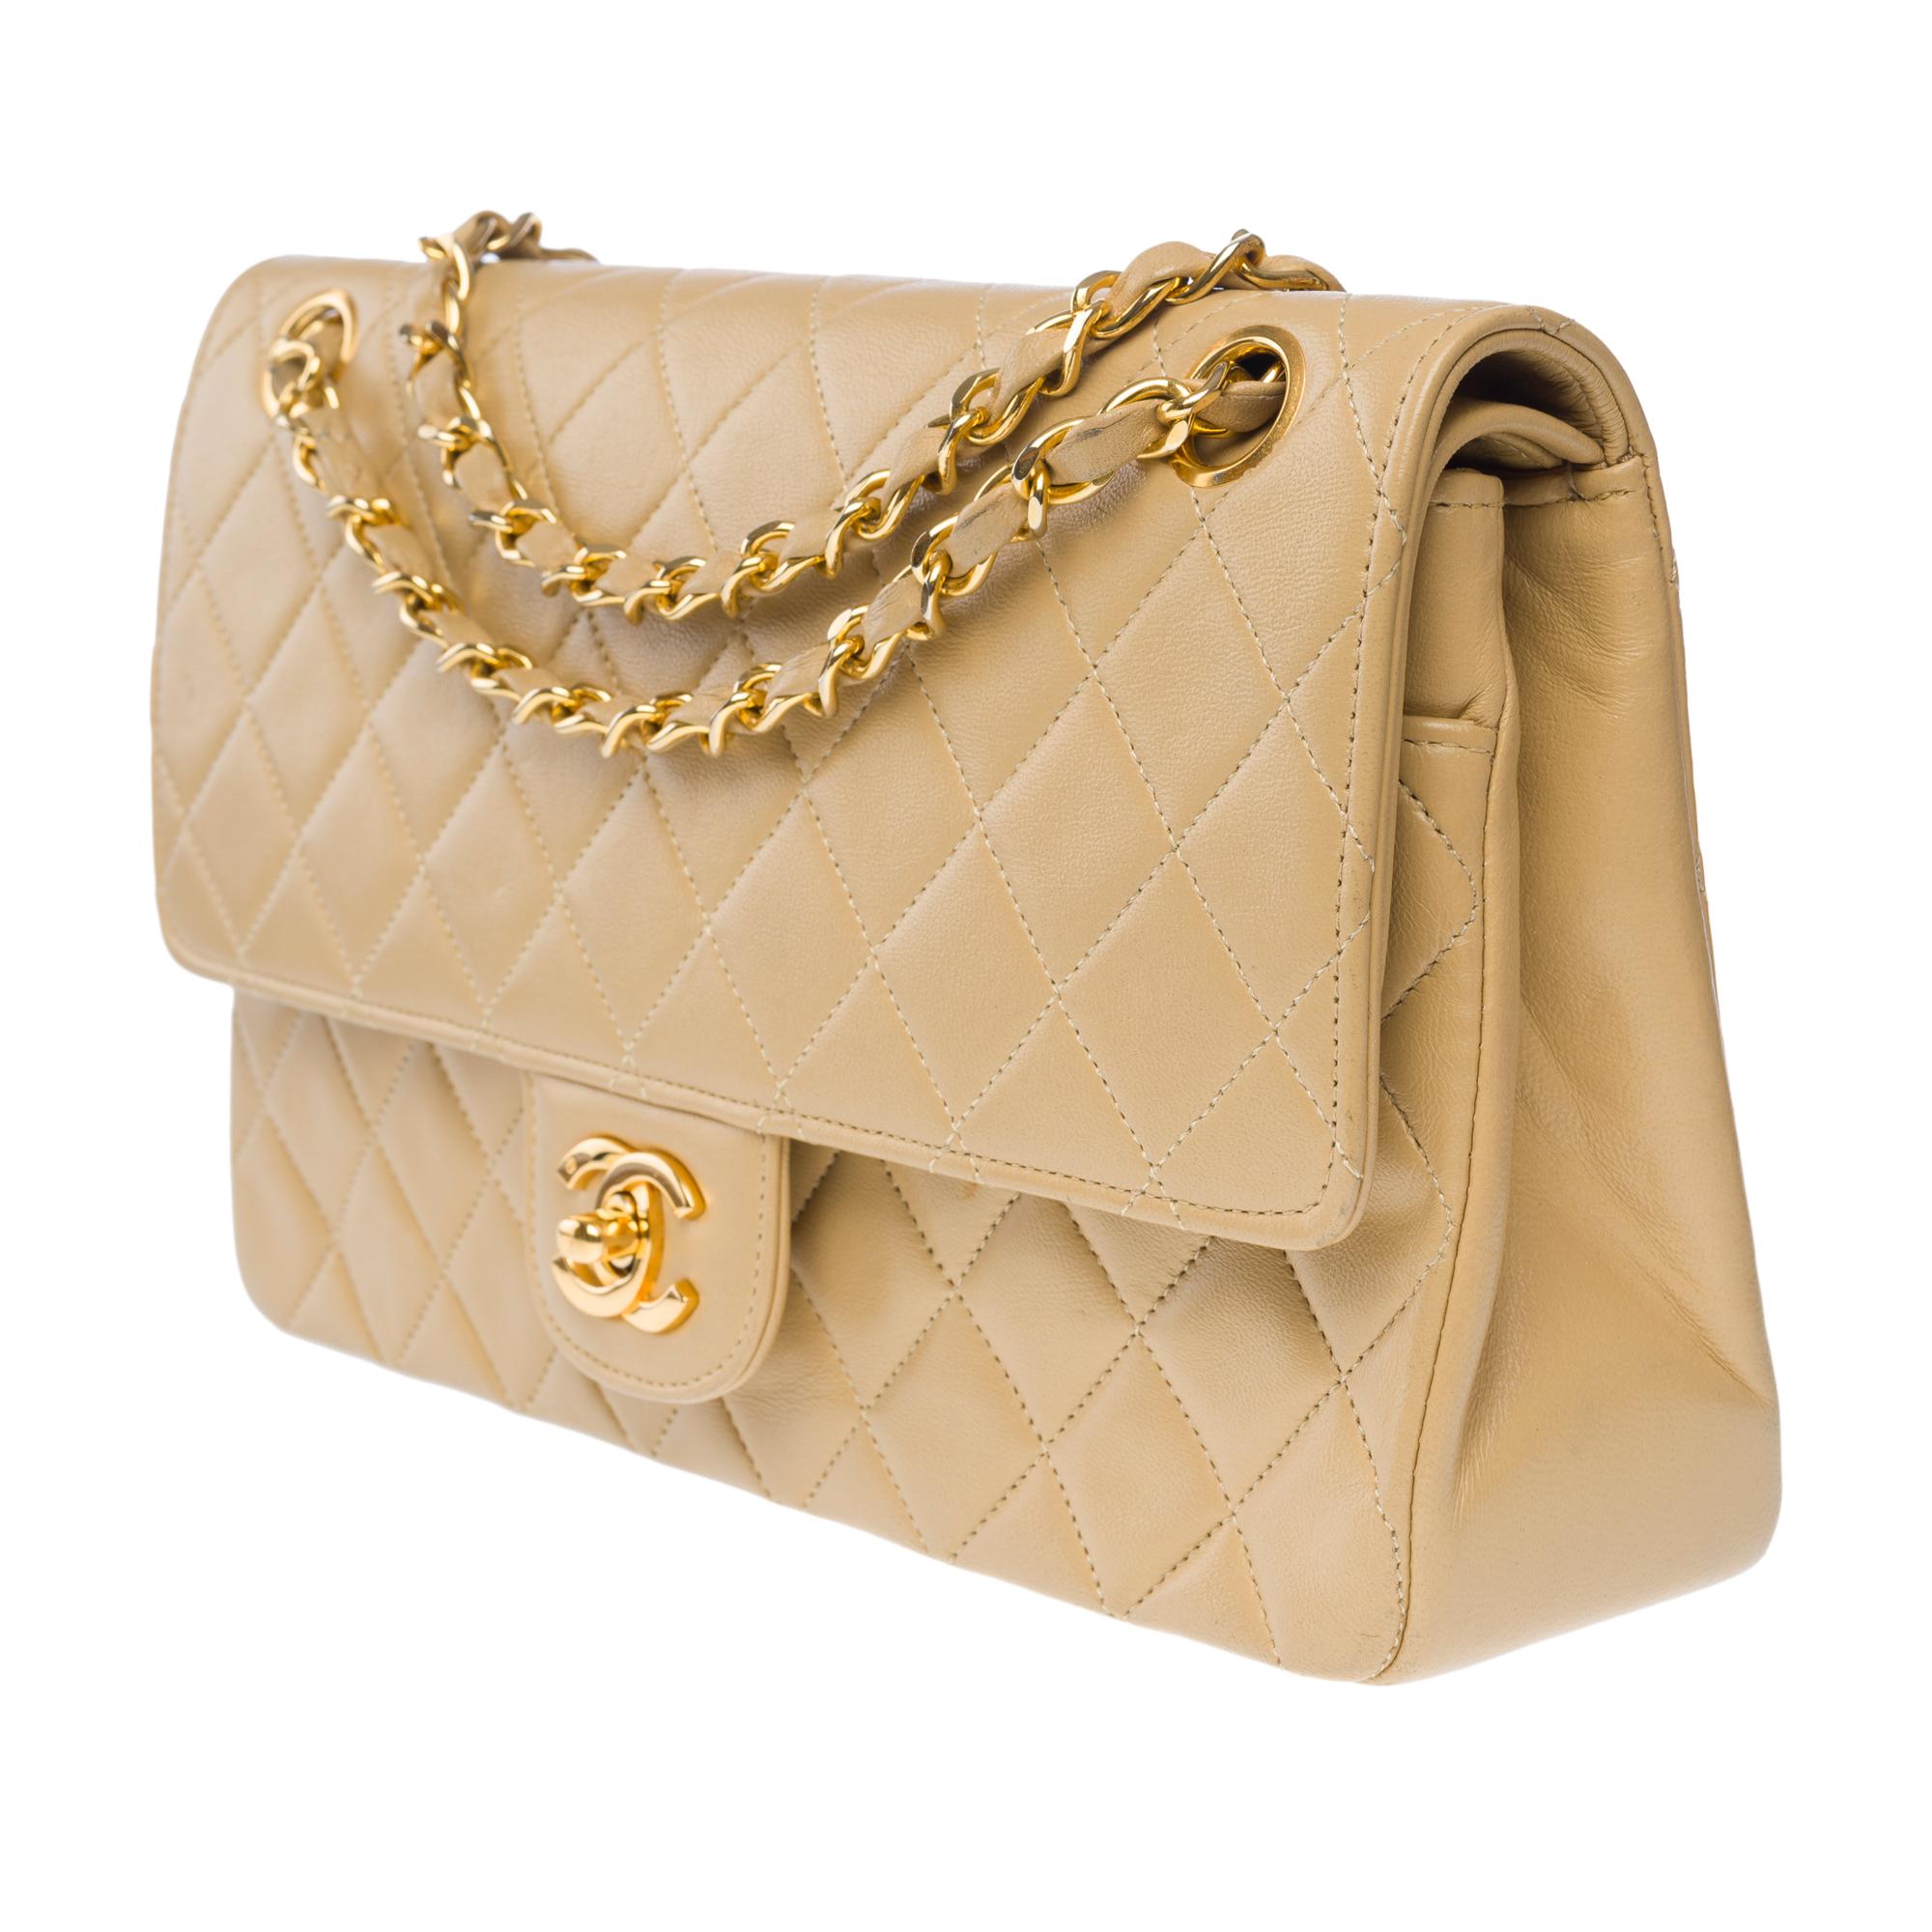 Women's Chanel Timeless double flap shoulder bag in beige quilted lambskin leather, GHW For Sale